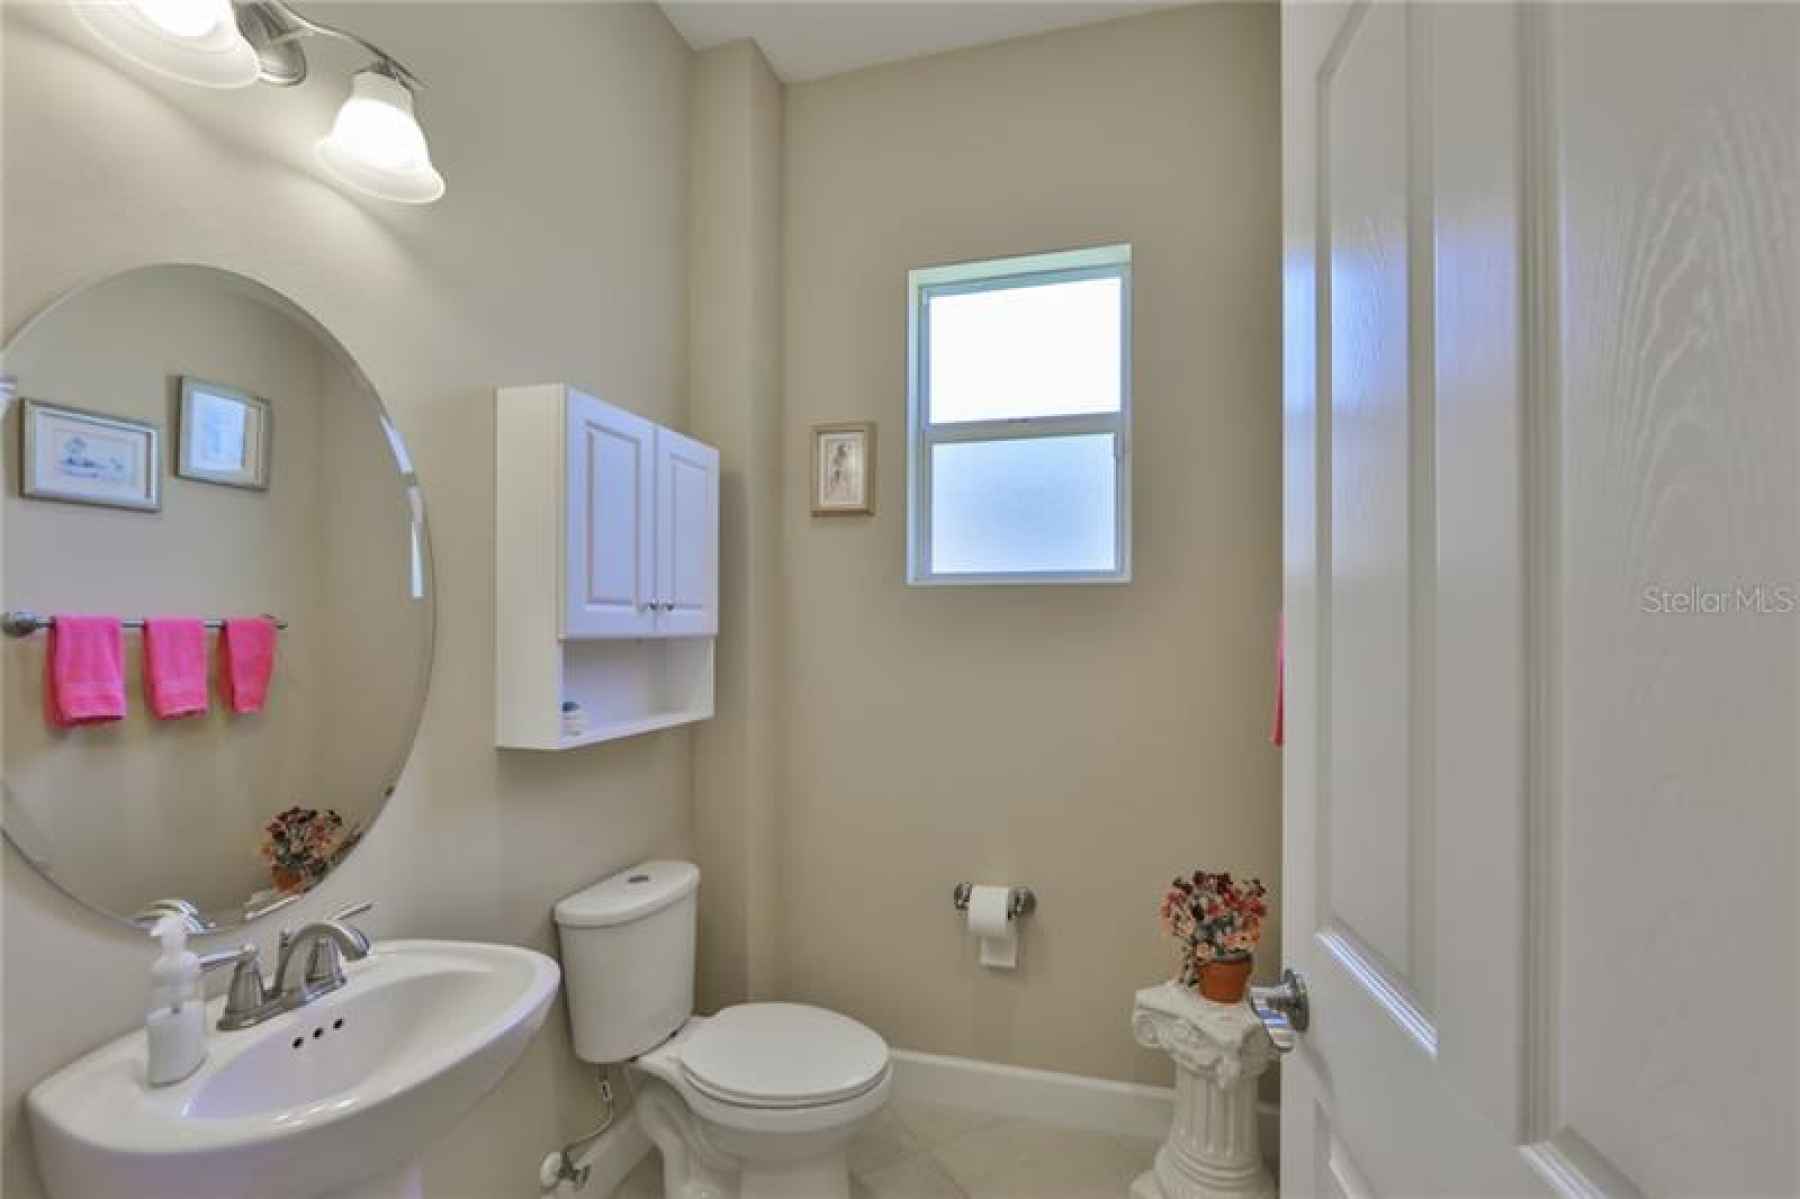 The half bath is perfect for visiting guests.